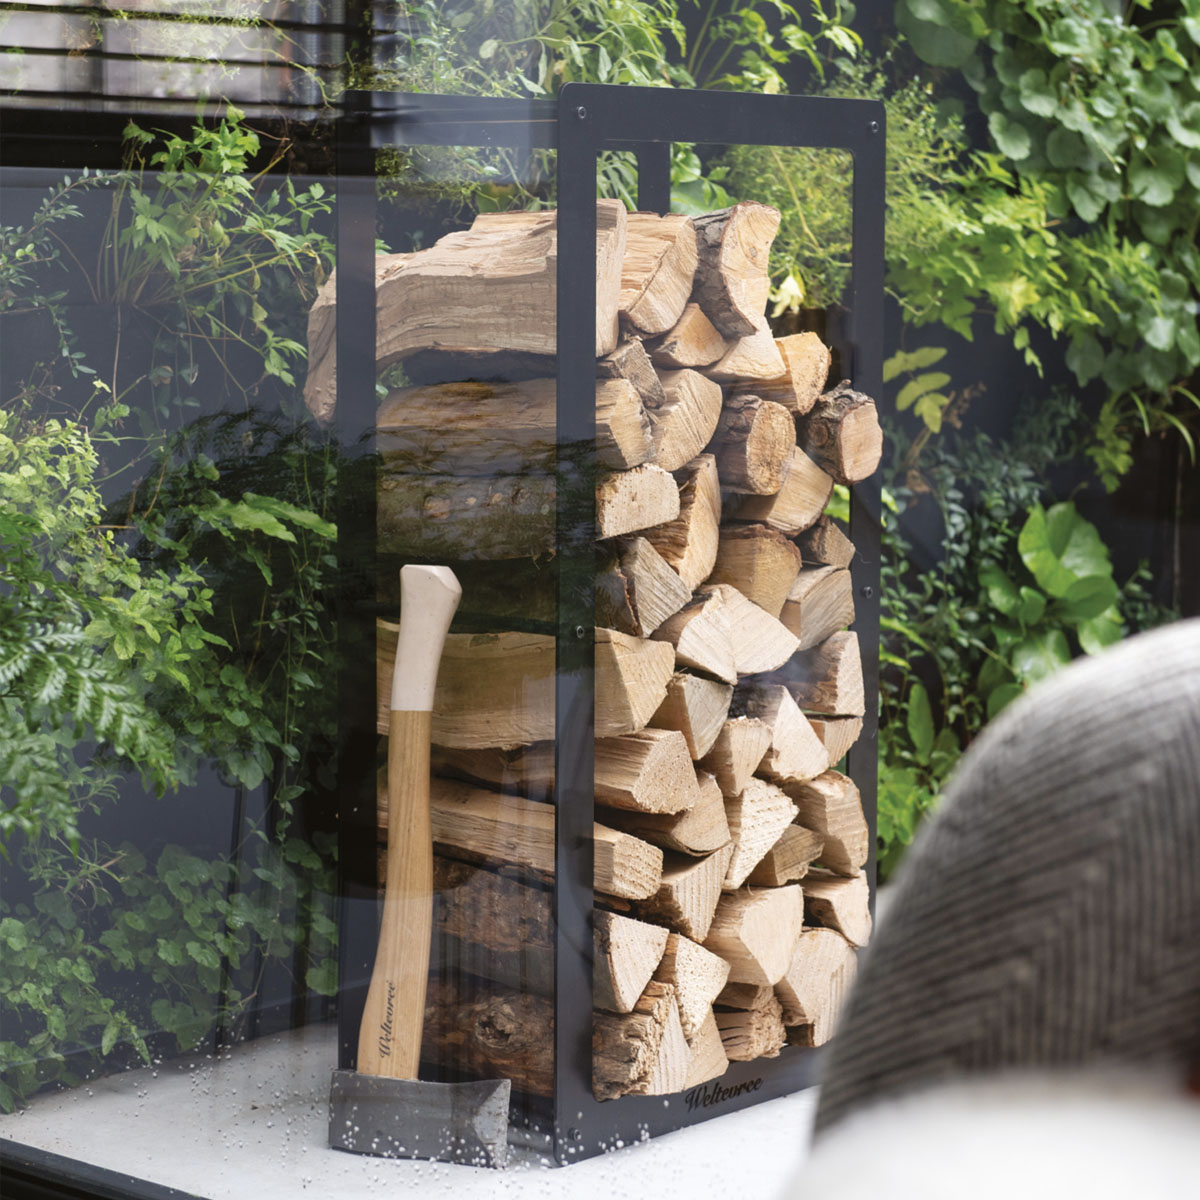 Weltevree Woodstock Frame, can be easily filled by stacking logs inside the frame